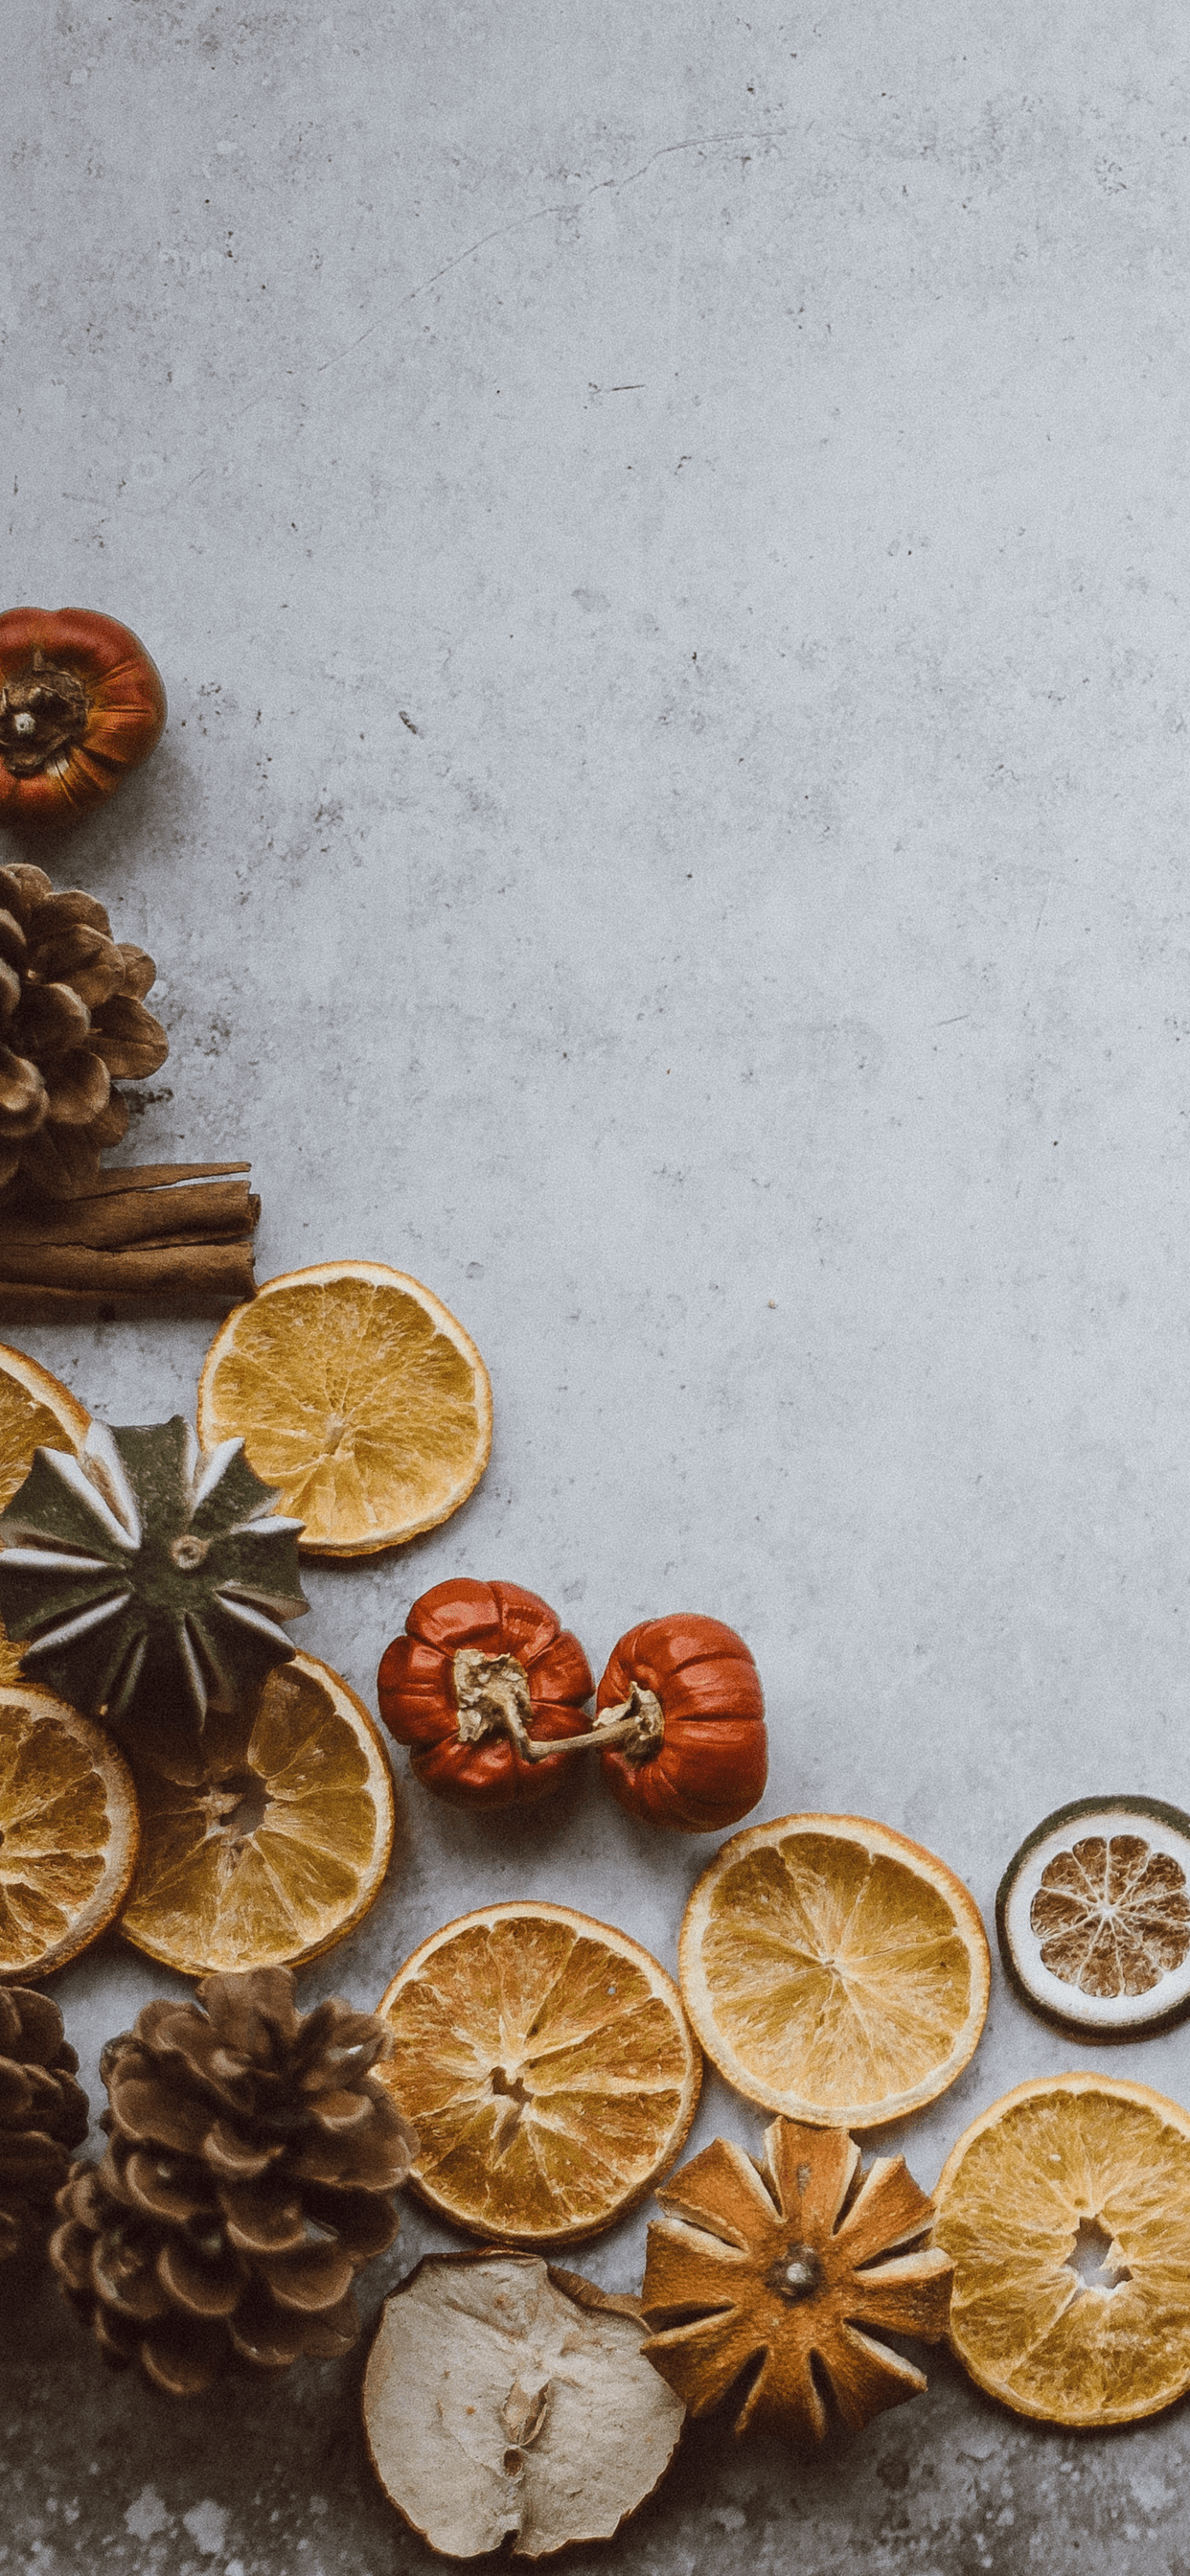 30k+ Aesthetic Food Pictures | Download Free Images on Unsplash